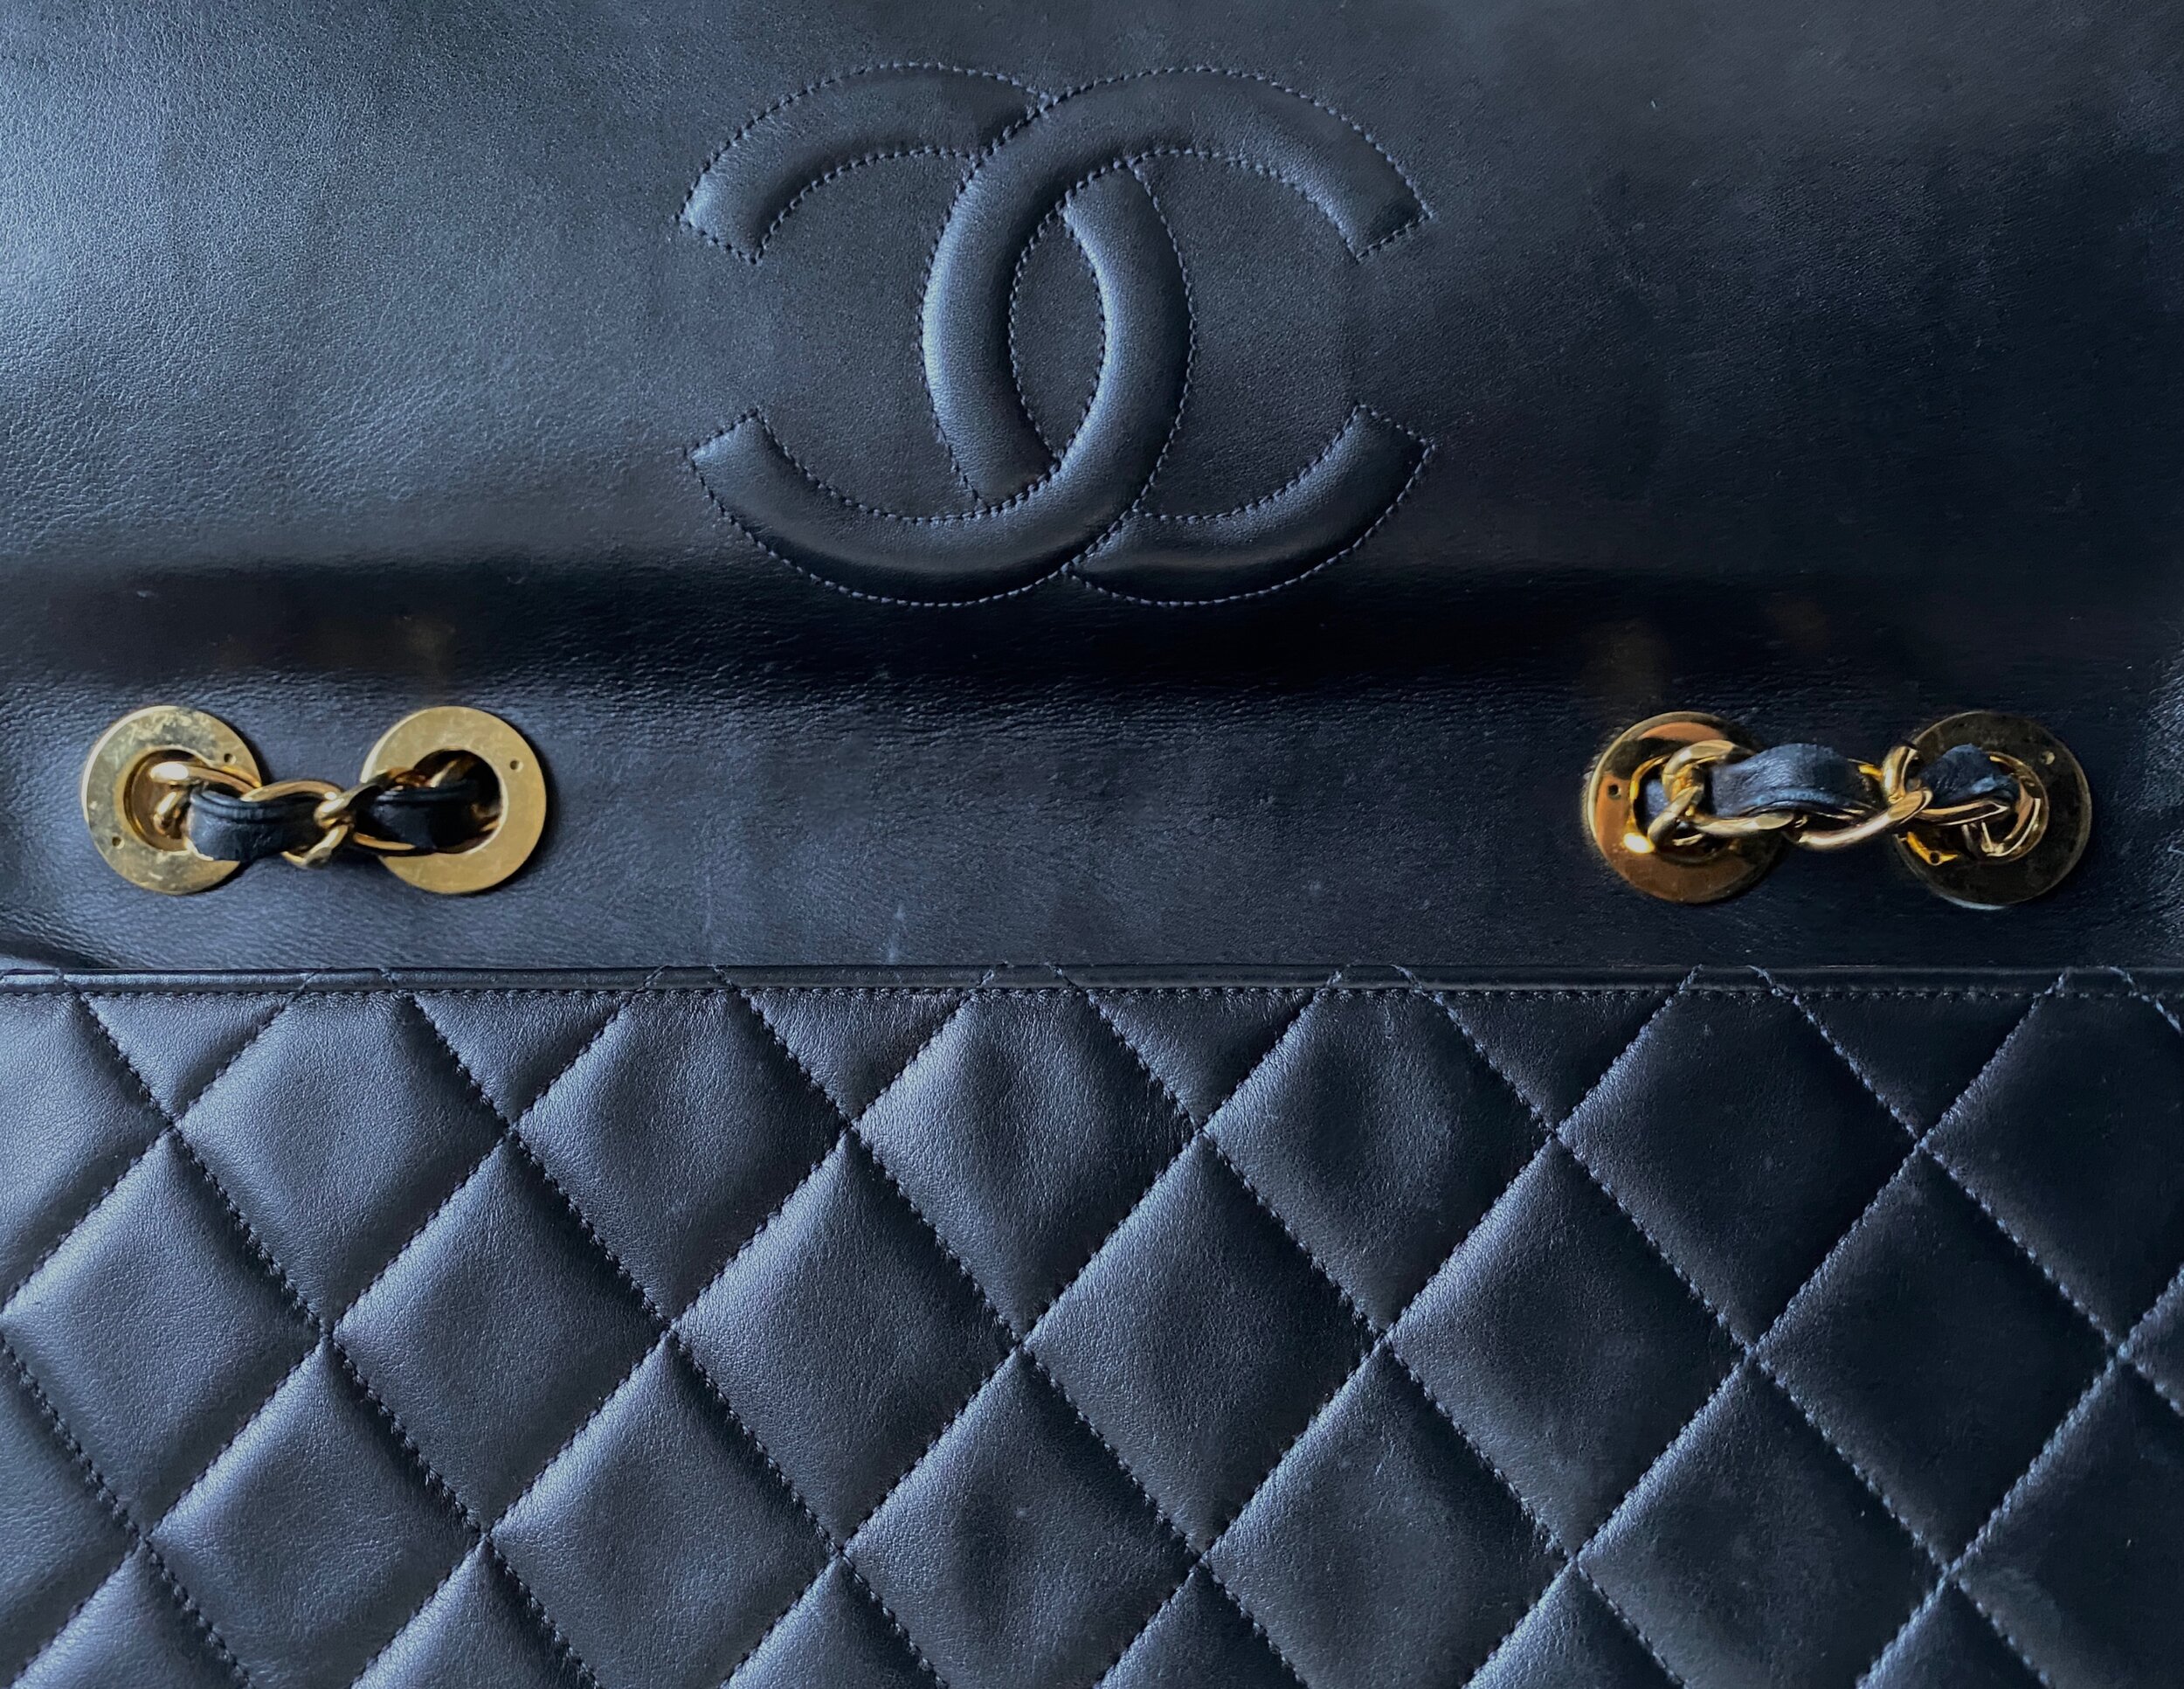 Chanel Hardware: Your Essential Guide